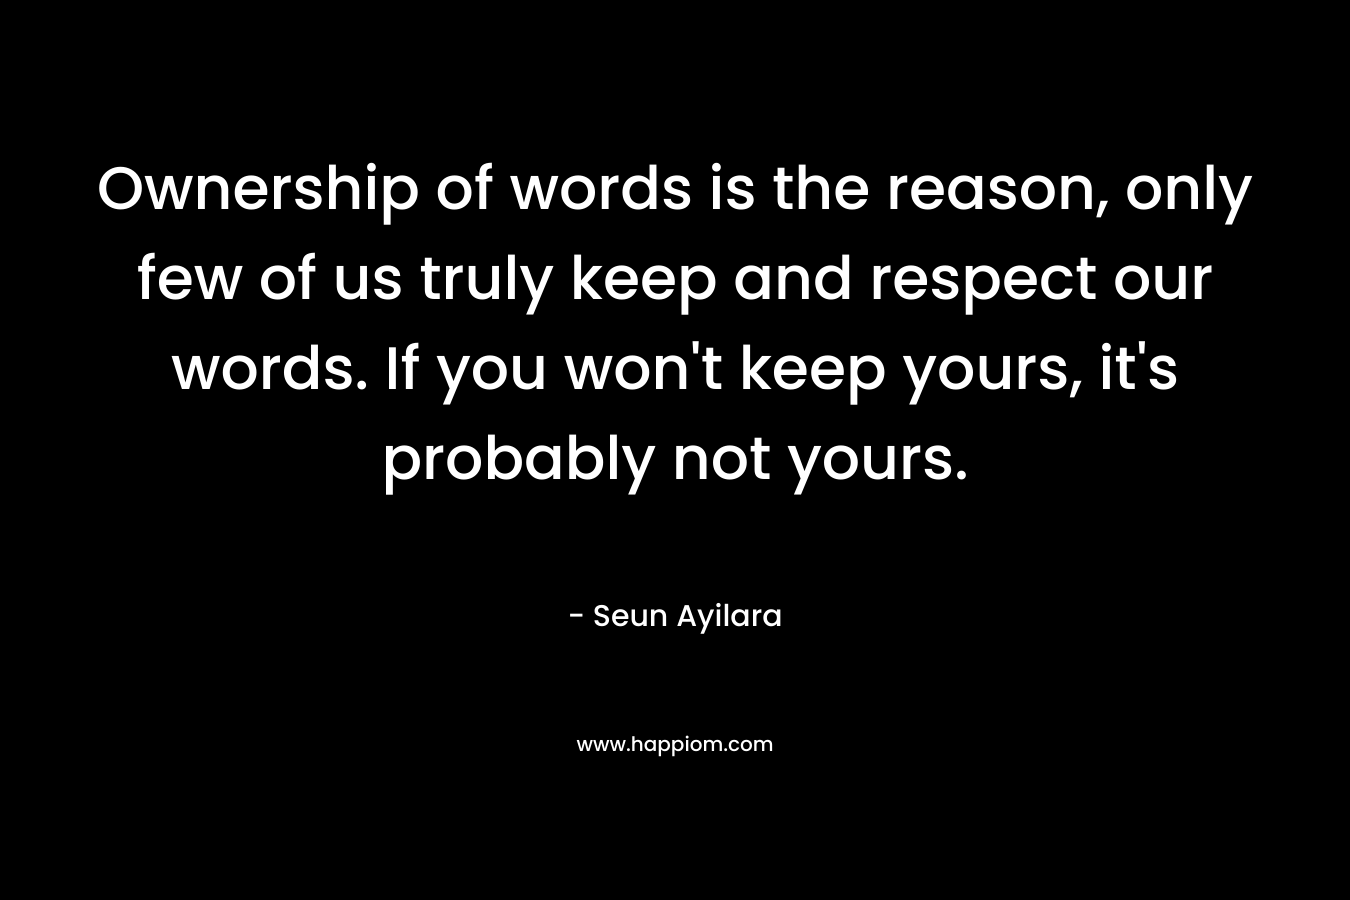 Ownership of words is the reason, only few of us truly keep and respect our words. If you won't keep yours, it's probably not yours.